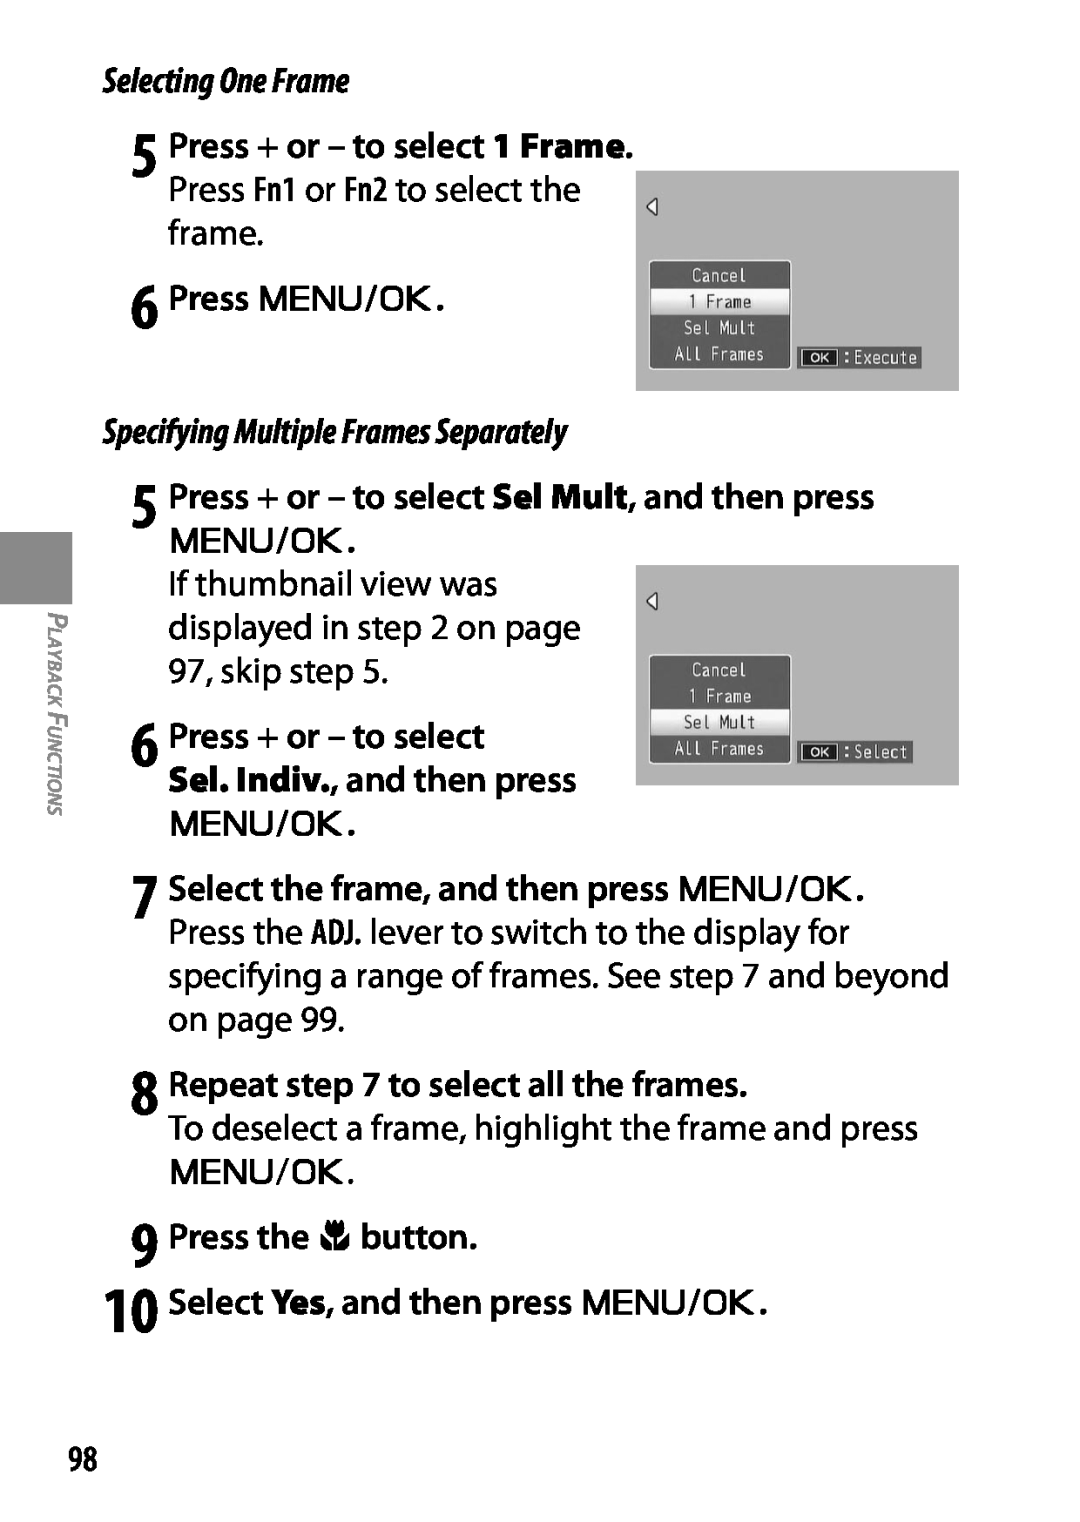 Ricoh 170553, GXR Press + or - to select 1 Frame. Press Fn1 or Fn2 to select the frame, 8 Repeat to select all the frames 